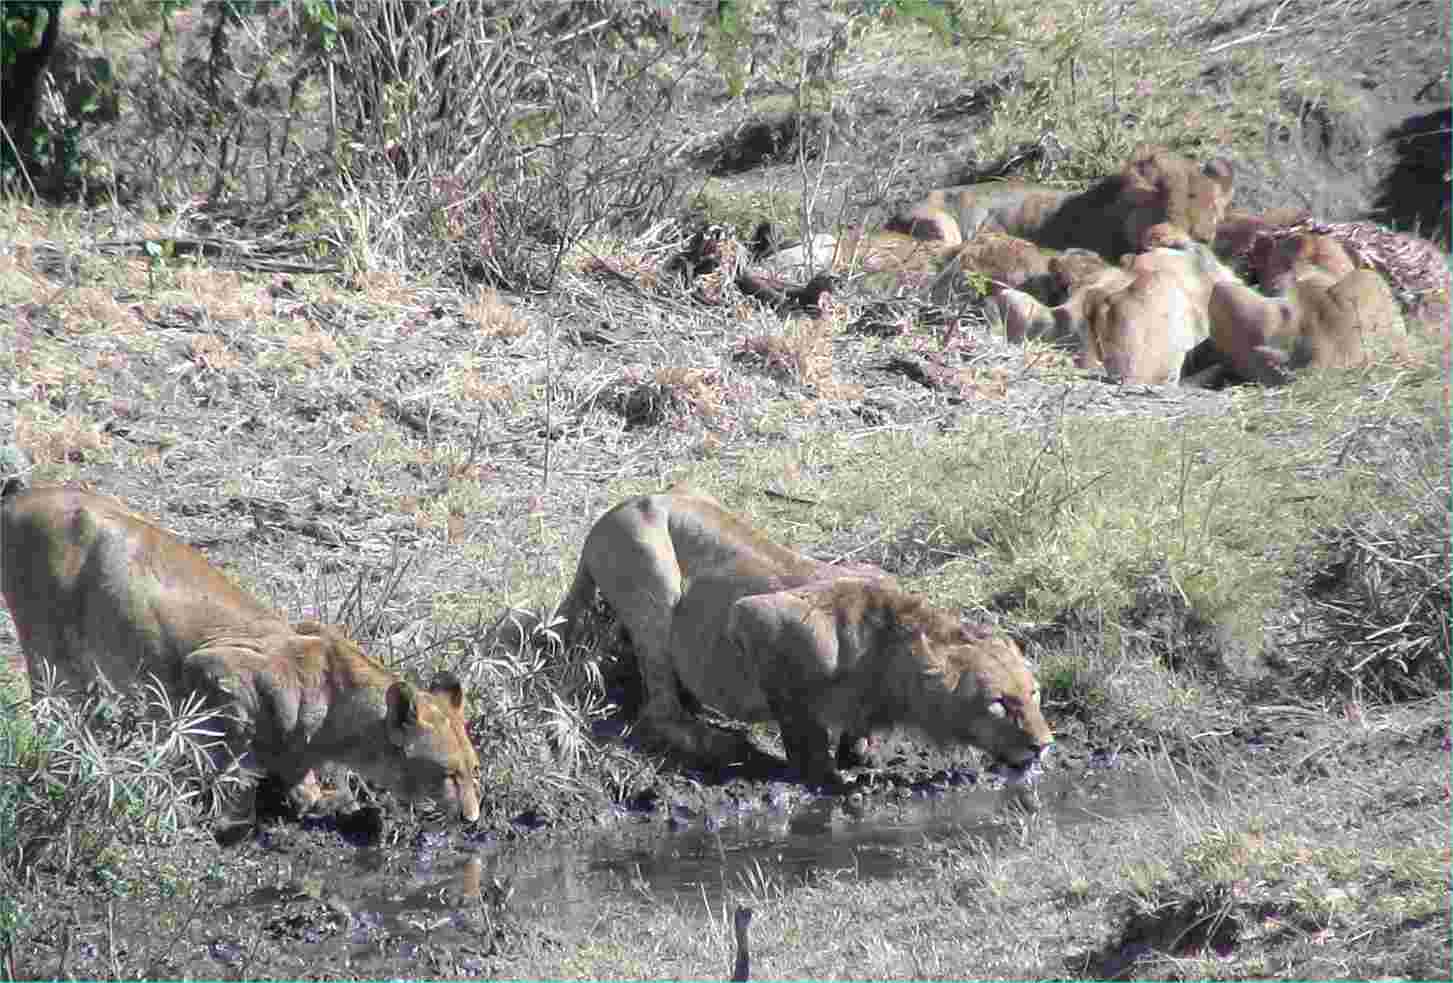 Lions eat their fill, then drink.  Photo by FG, Dec. 2005.